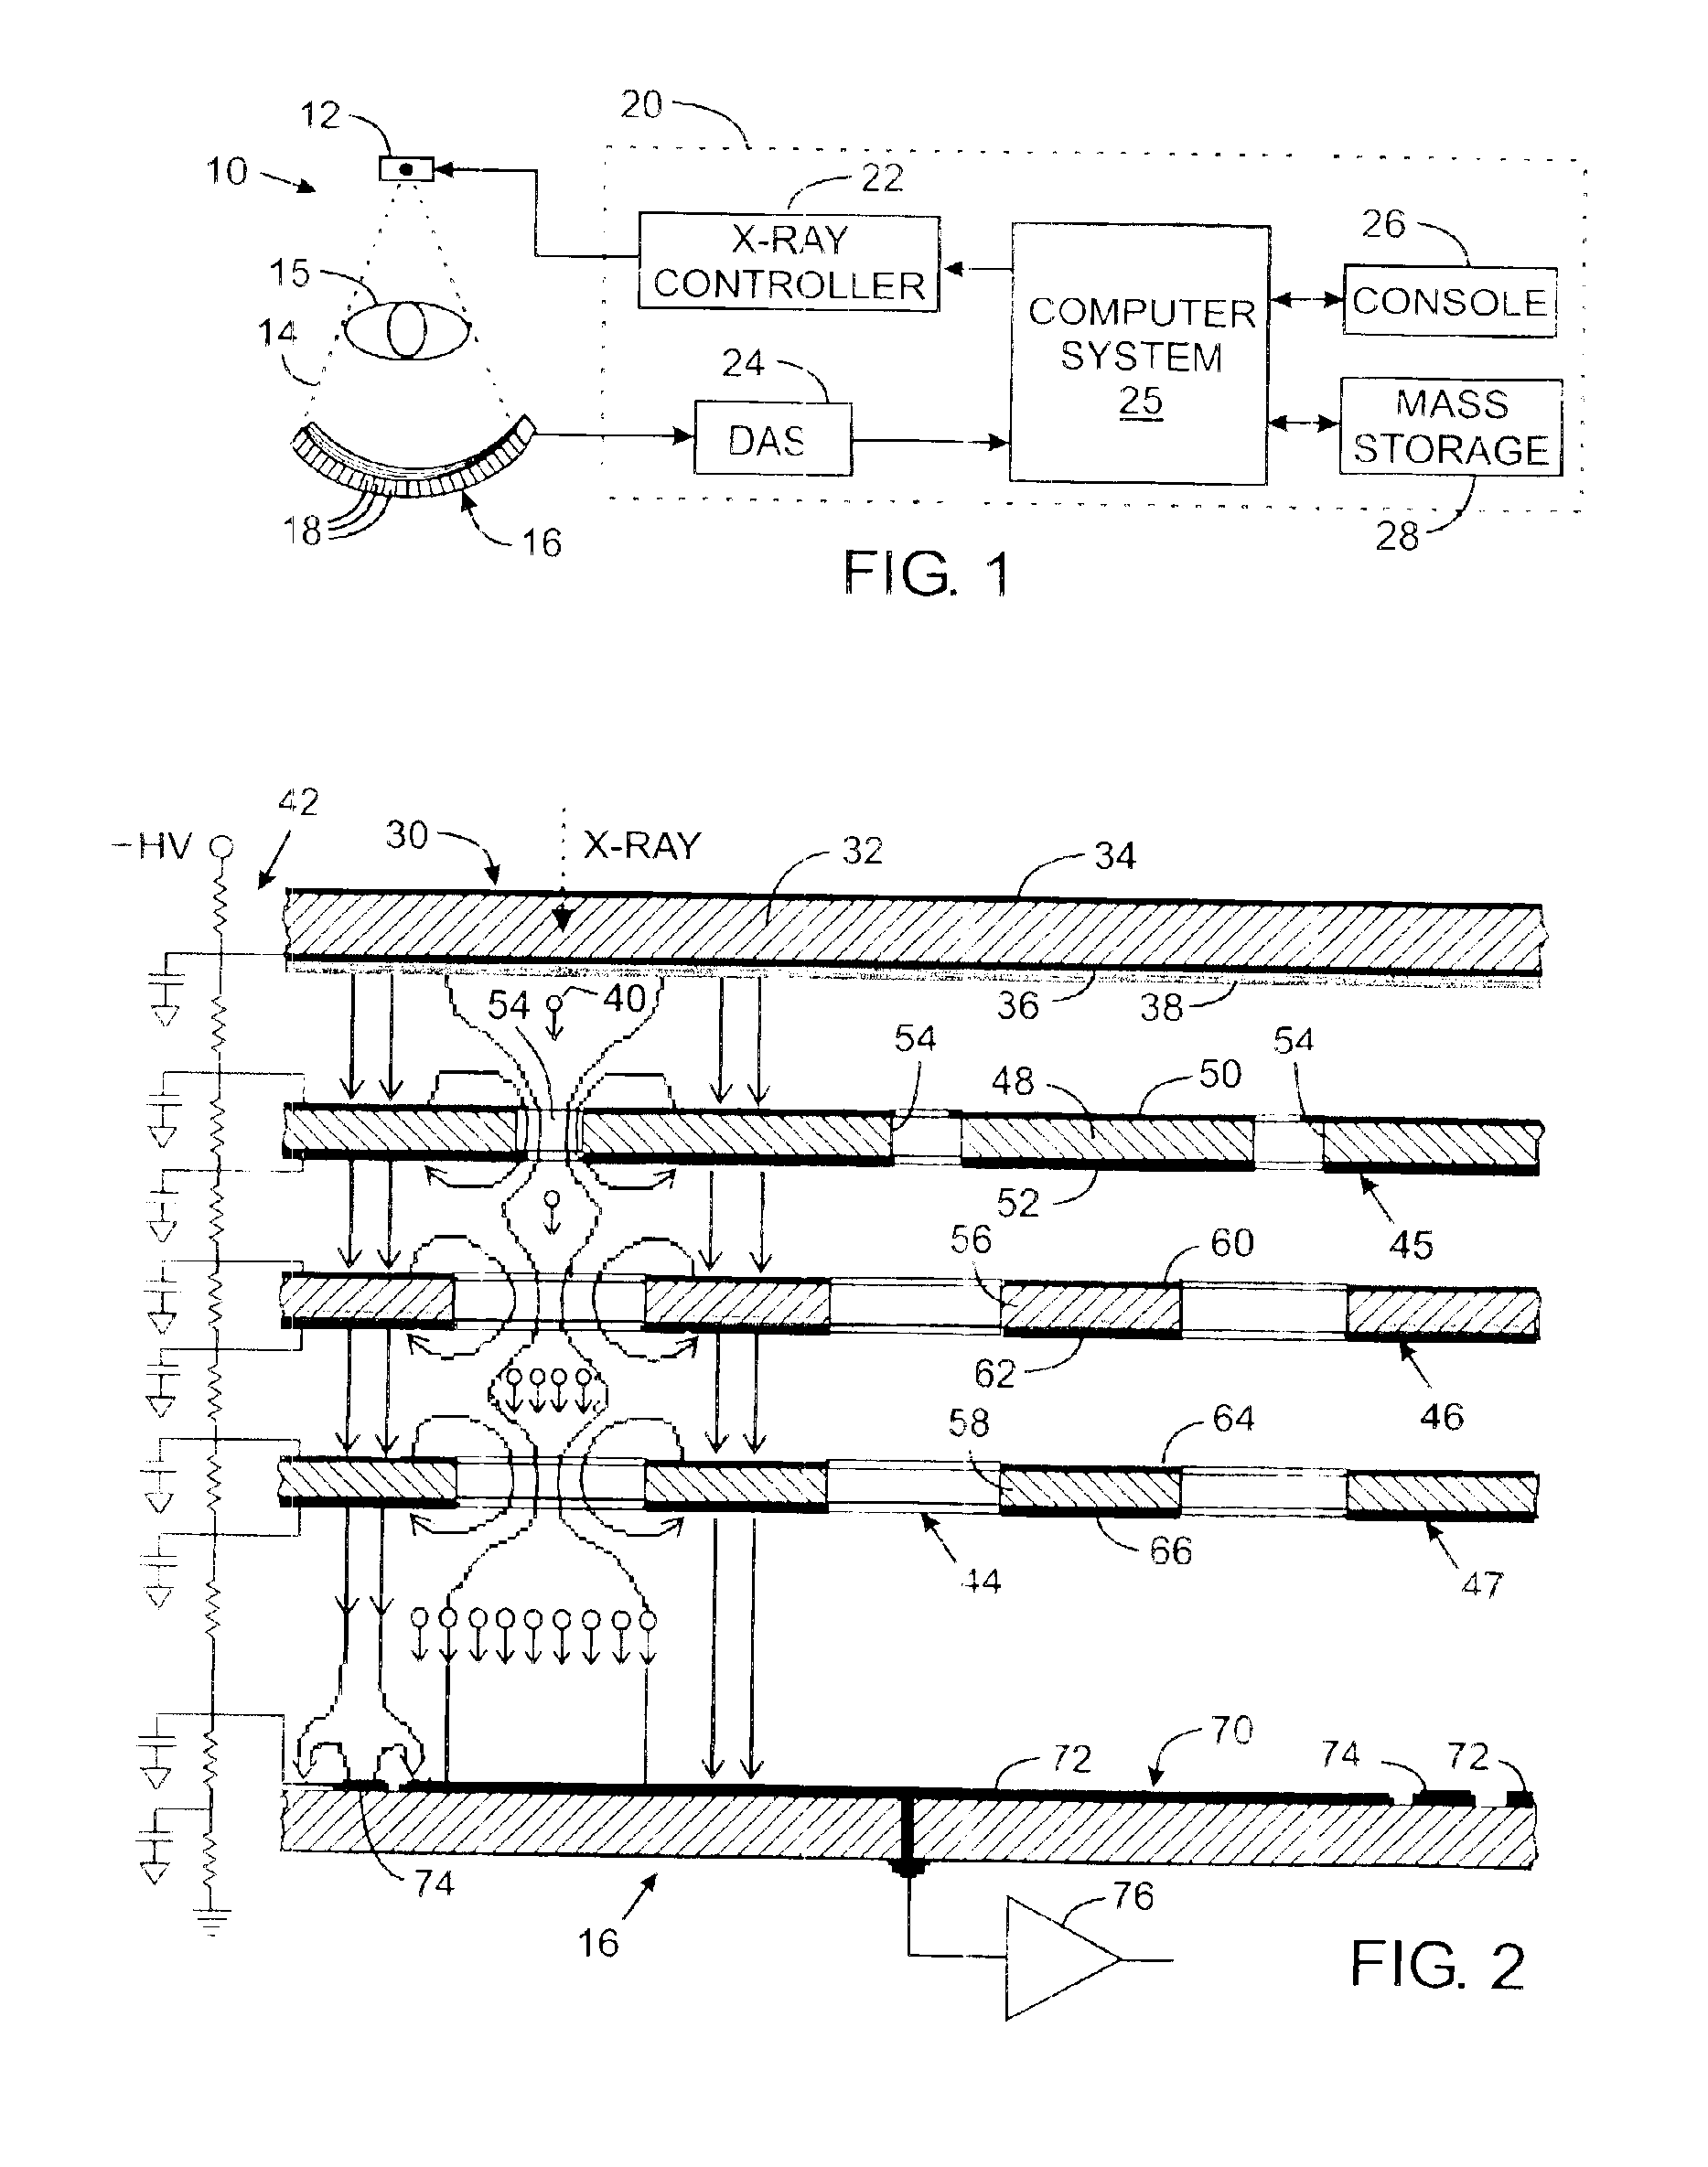 Centroid apparatus and method for sub-pixel X-ray image resolution